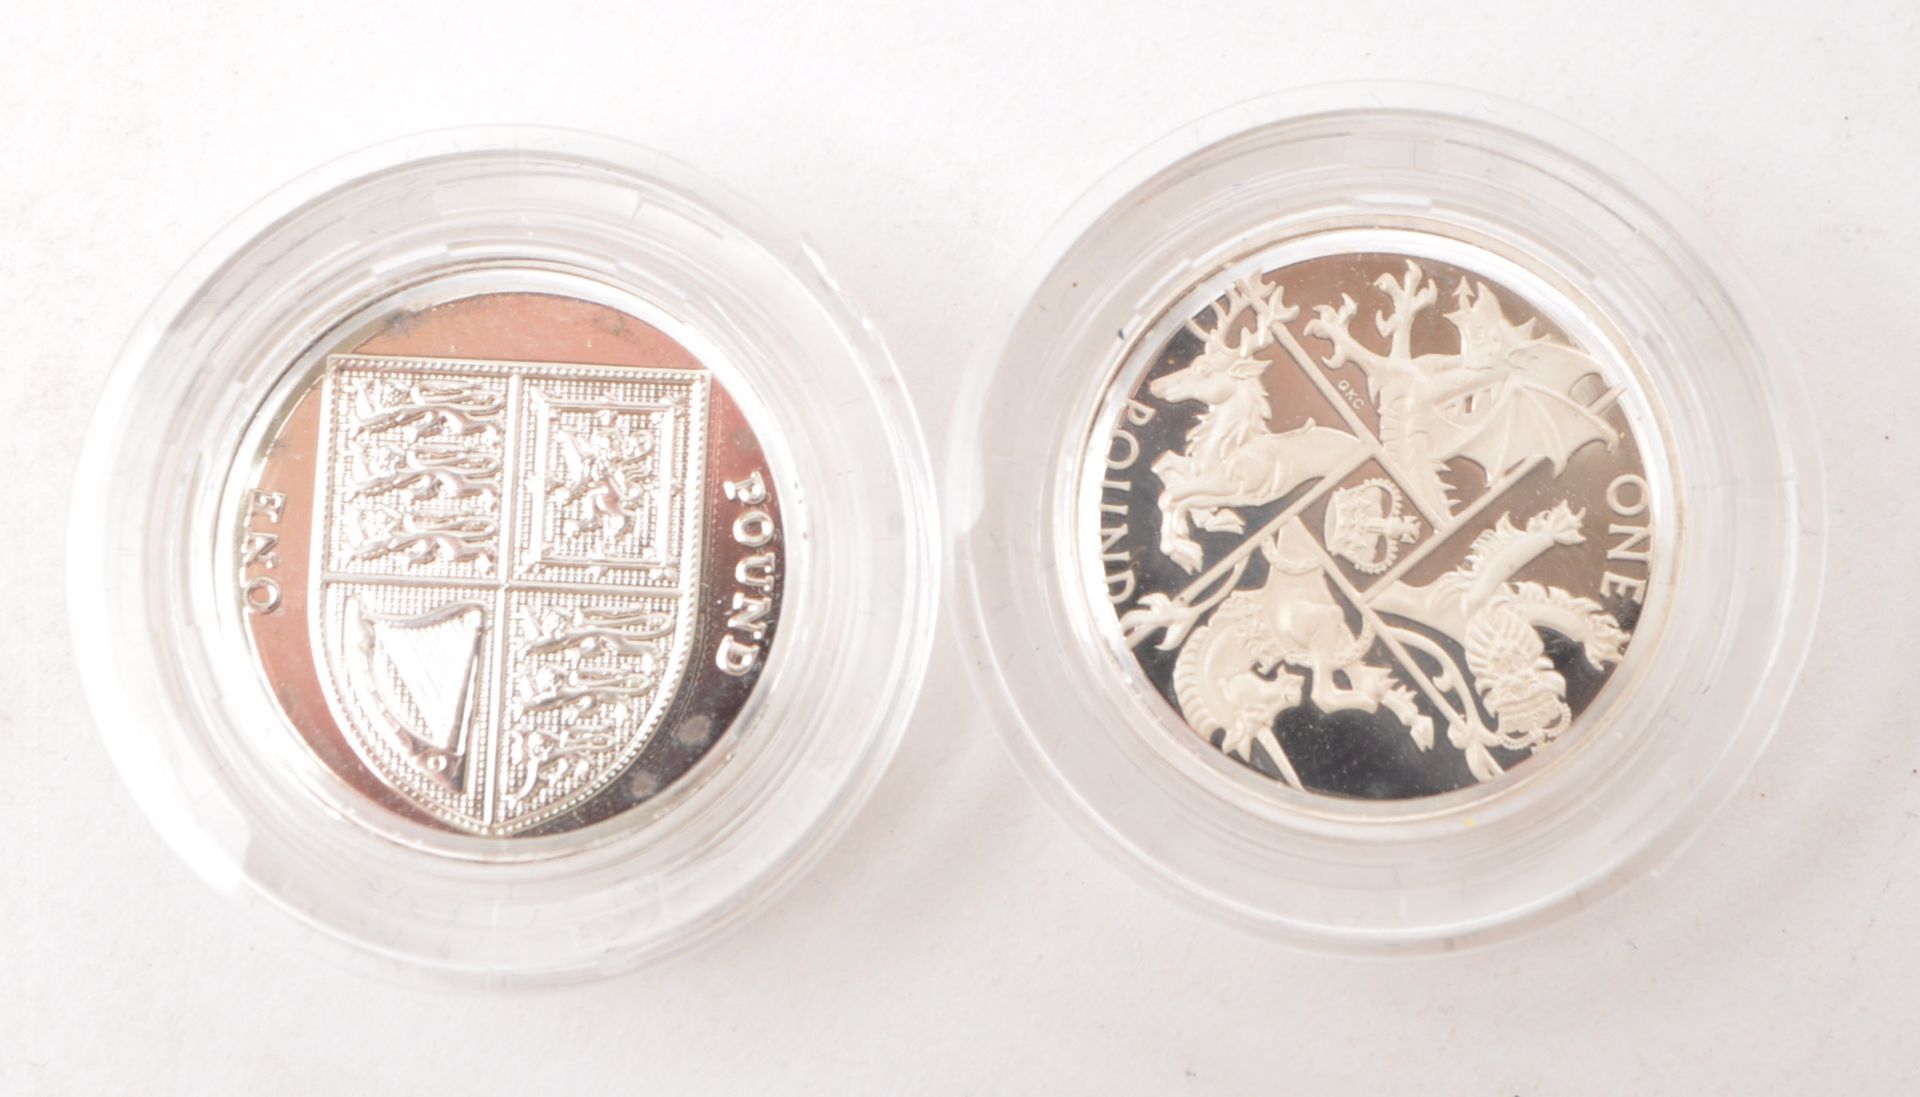 SET OF FOUR ROYAL MINT SILVER PROOF ONE POUND / £1 COINS - Image 4 of 5